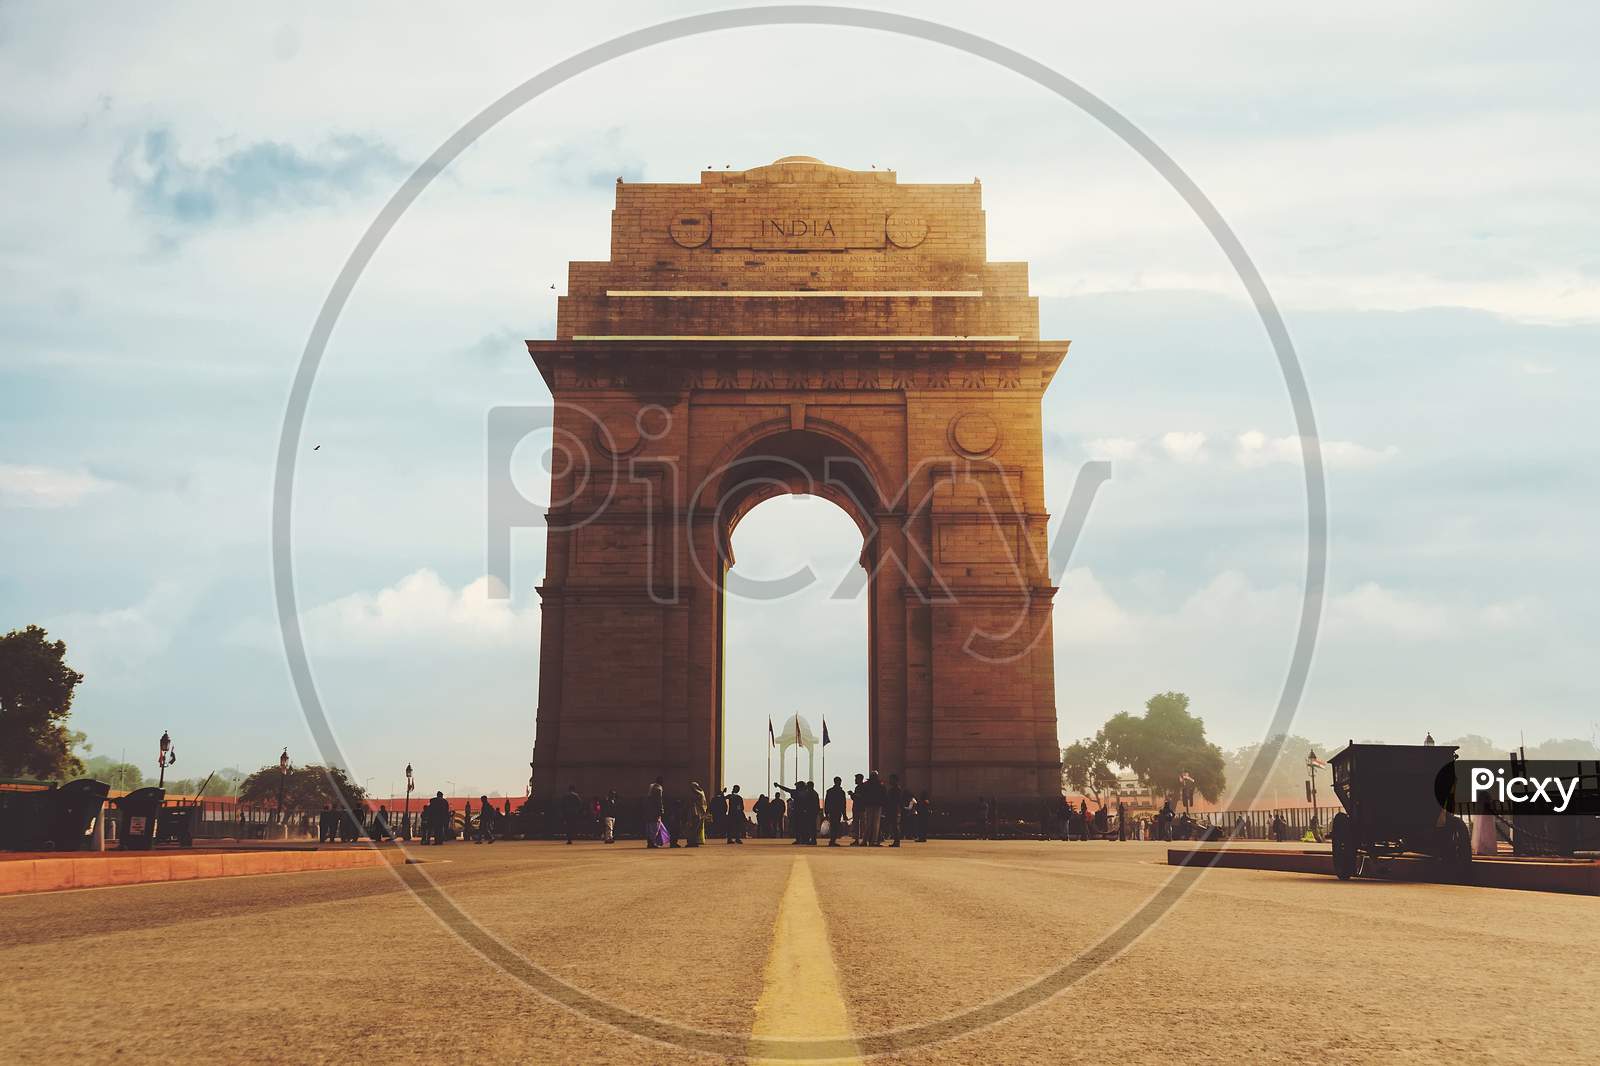 Dramatic Angle View Of The India Gate Monument In New Delhi, India. A War Memorial On Rajpath Road